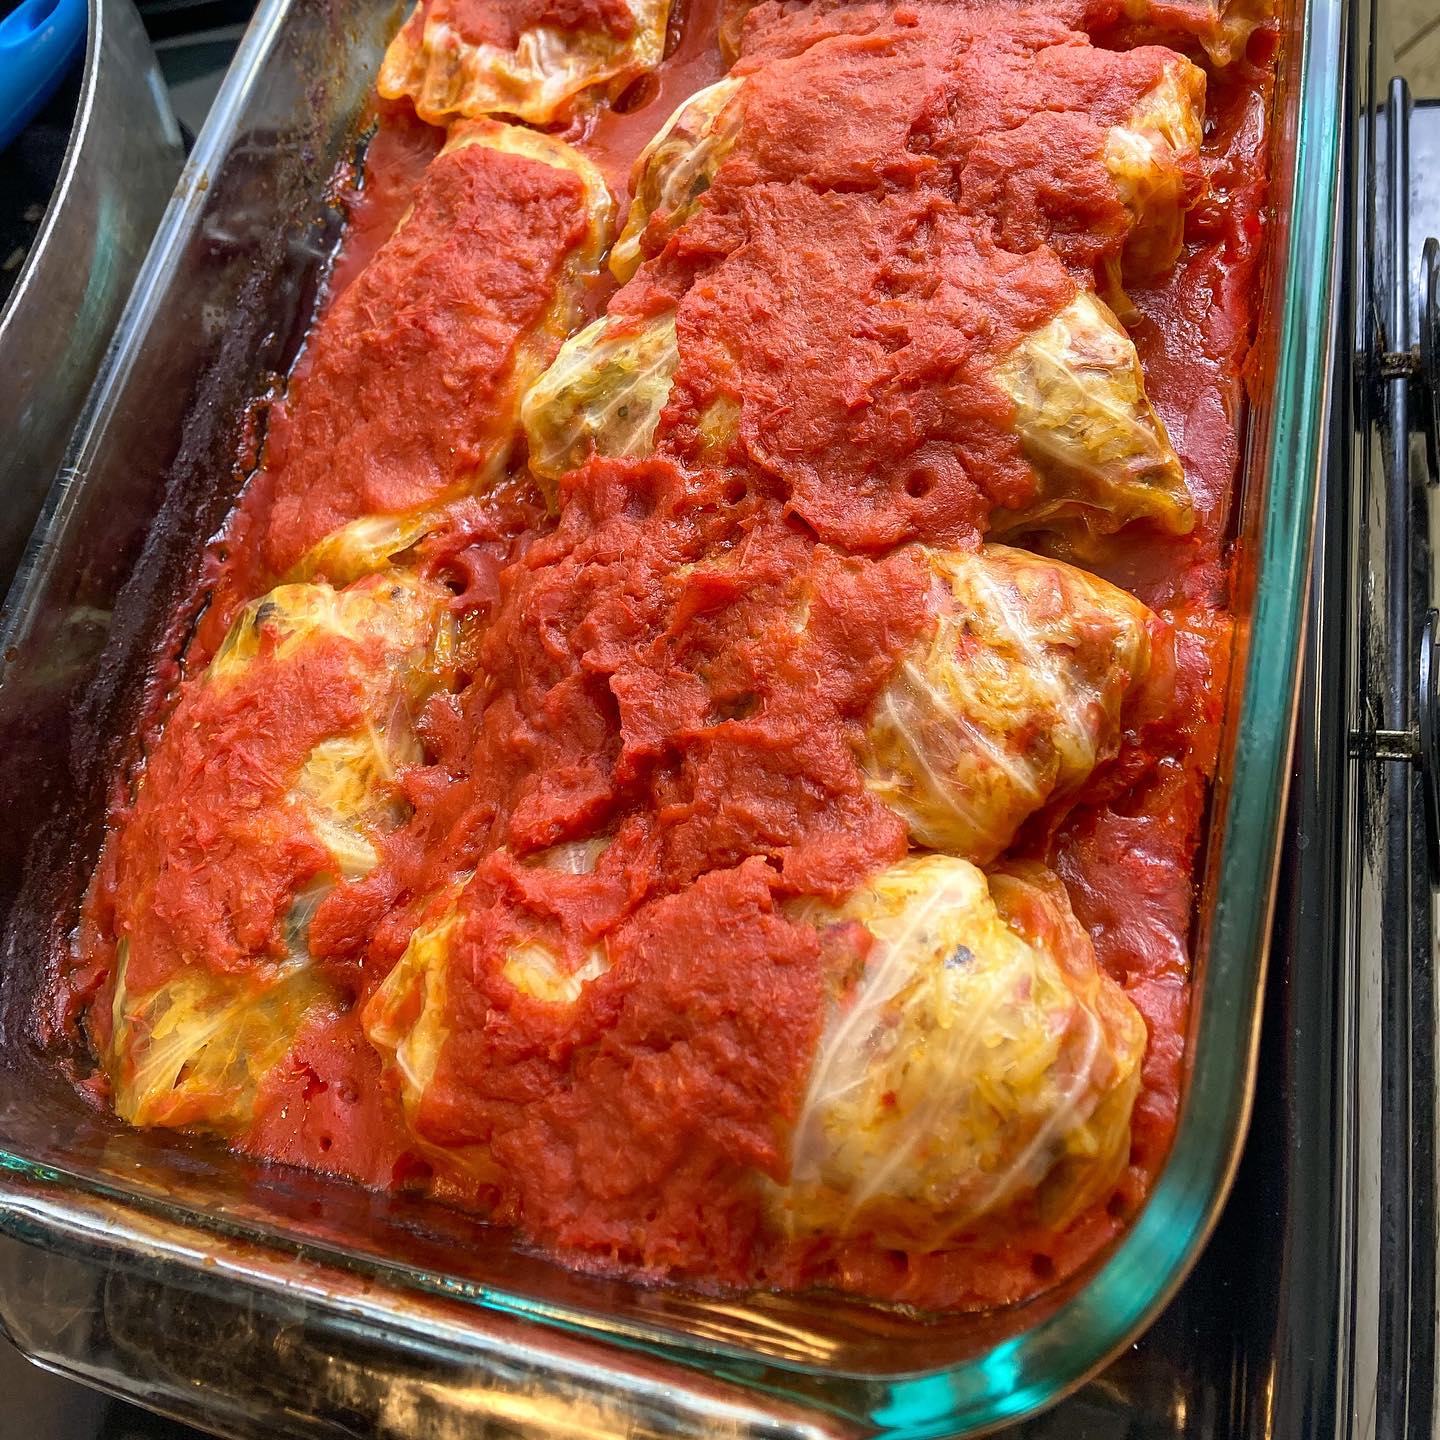 I’ve been gone for a minute but I’m back here’s some cabbage rolls! lol 😂
.
.
.
.
.
No but for real these are CORNED BEEF CABBAGE ROLLS & they are rockin if we’re being honest. Get the recipe on the blog—link in bio 😘
.
.
.
.
.
#foodporn #foodie #foodblogger #blackfoodie #blackfoodbloggers #dmvblogger #blackchefs #cornedbeef #cabbage #cabbagerolls #foodnetwork #eeeeeats #f52grams #homecooking #cookathome #supportblackbusinesses #foodphotography #eatthis #onmytable